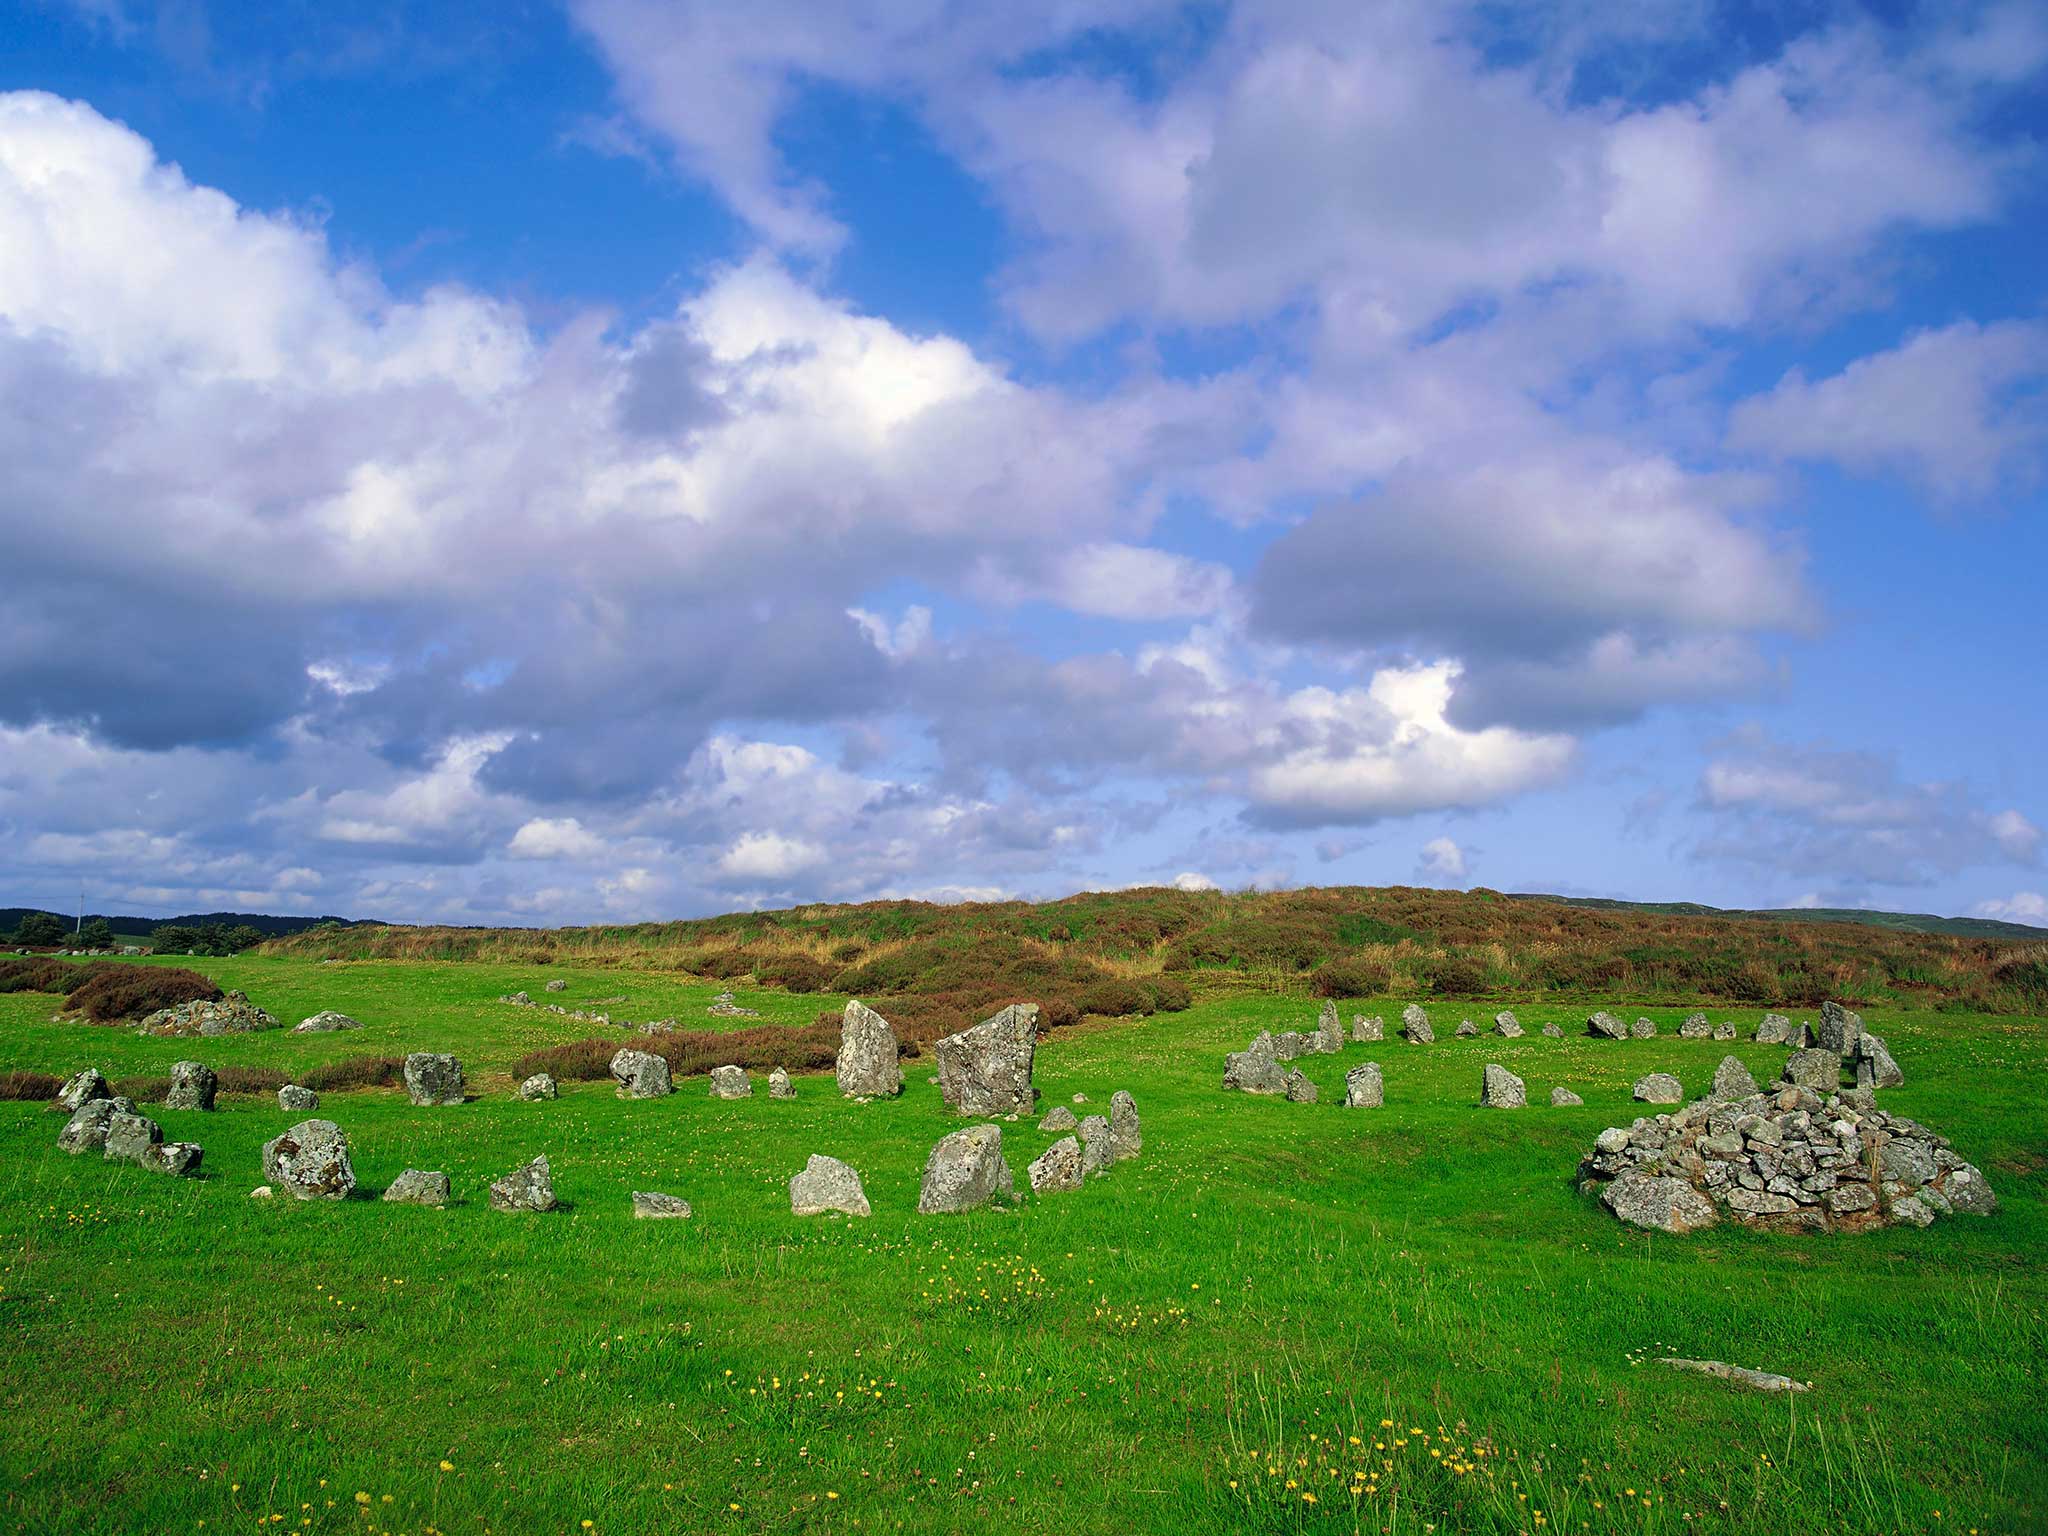 One of Northern Ireland's stone circles (Beaghmore) where the Order of The Gold River could marry its followers